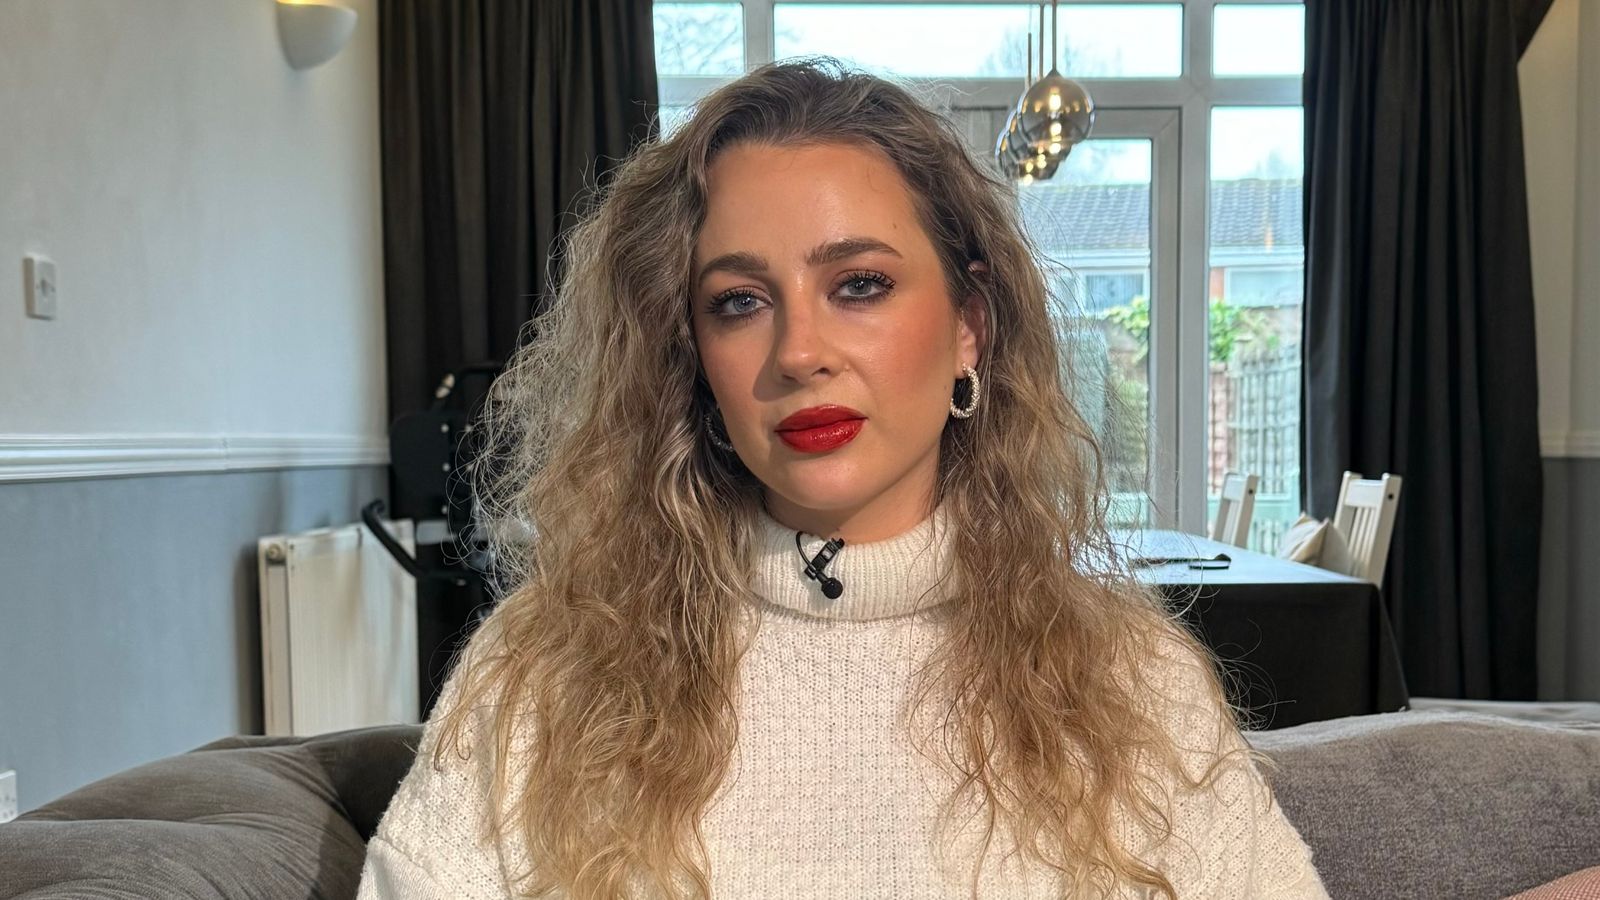 'I thought I was going mad': Former make-up artist says she lost her job after being marked down by AI tool